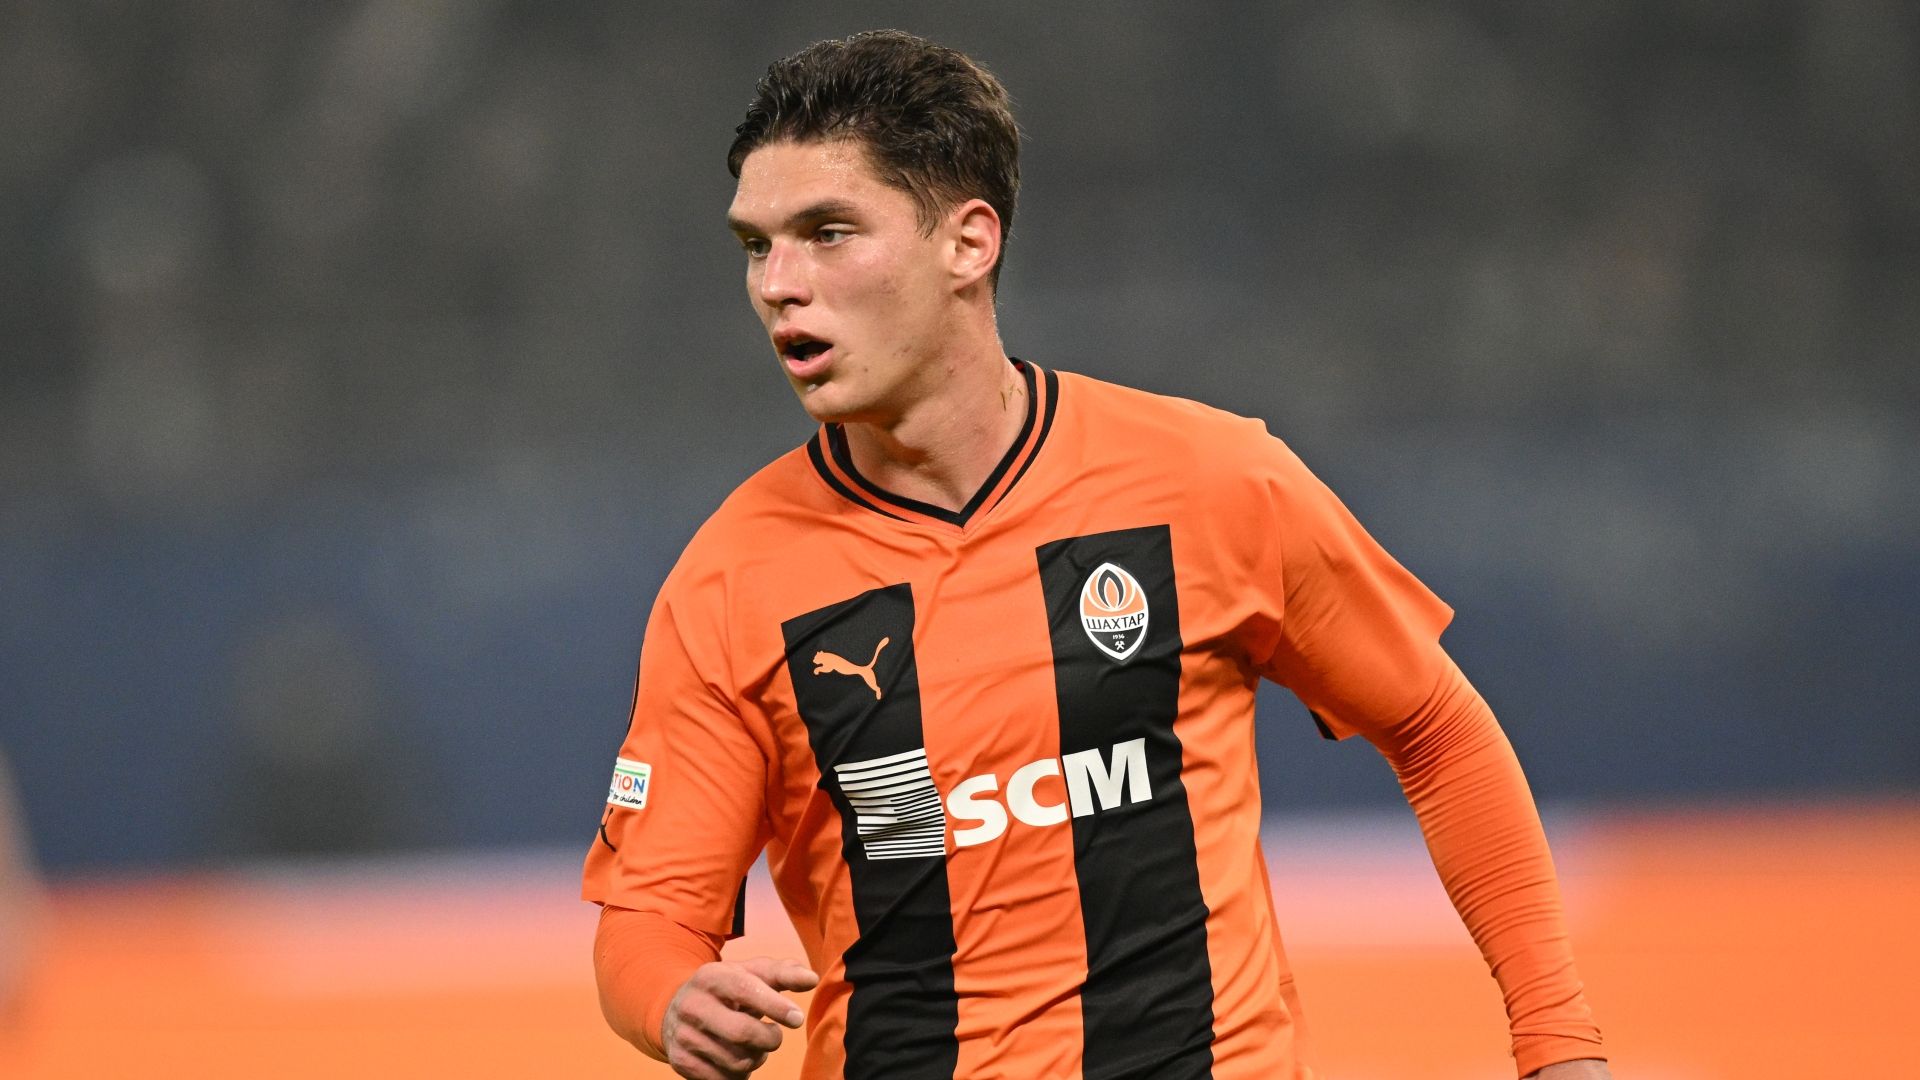 Shakhtar Donetsk confirm Arsenal-linked Georgiy Sudakov will 'definitely' leave this summer as officials fly to London for talks